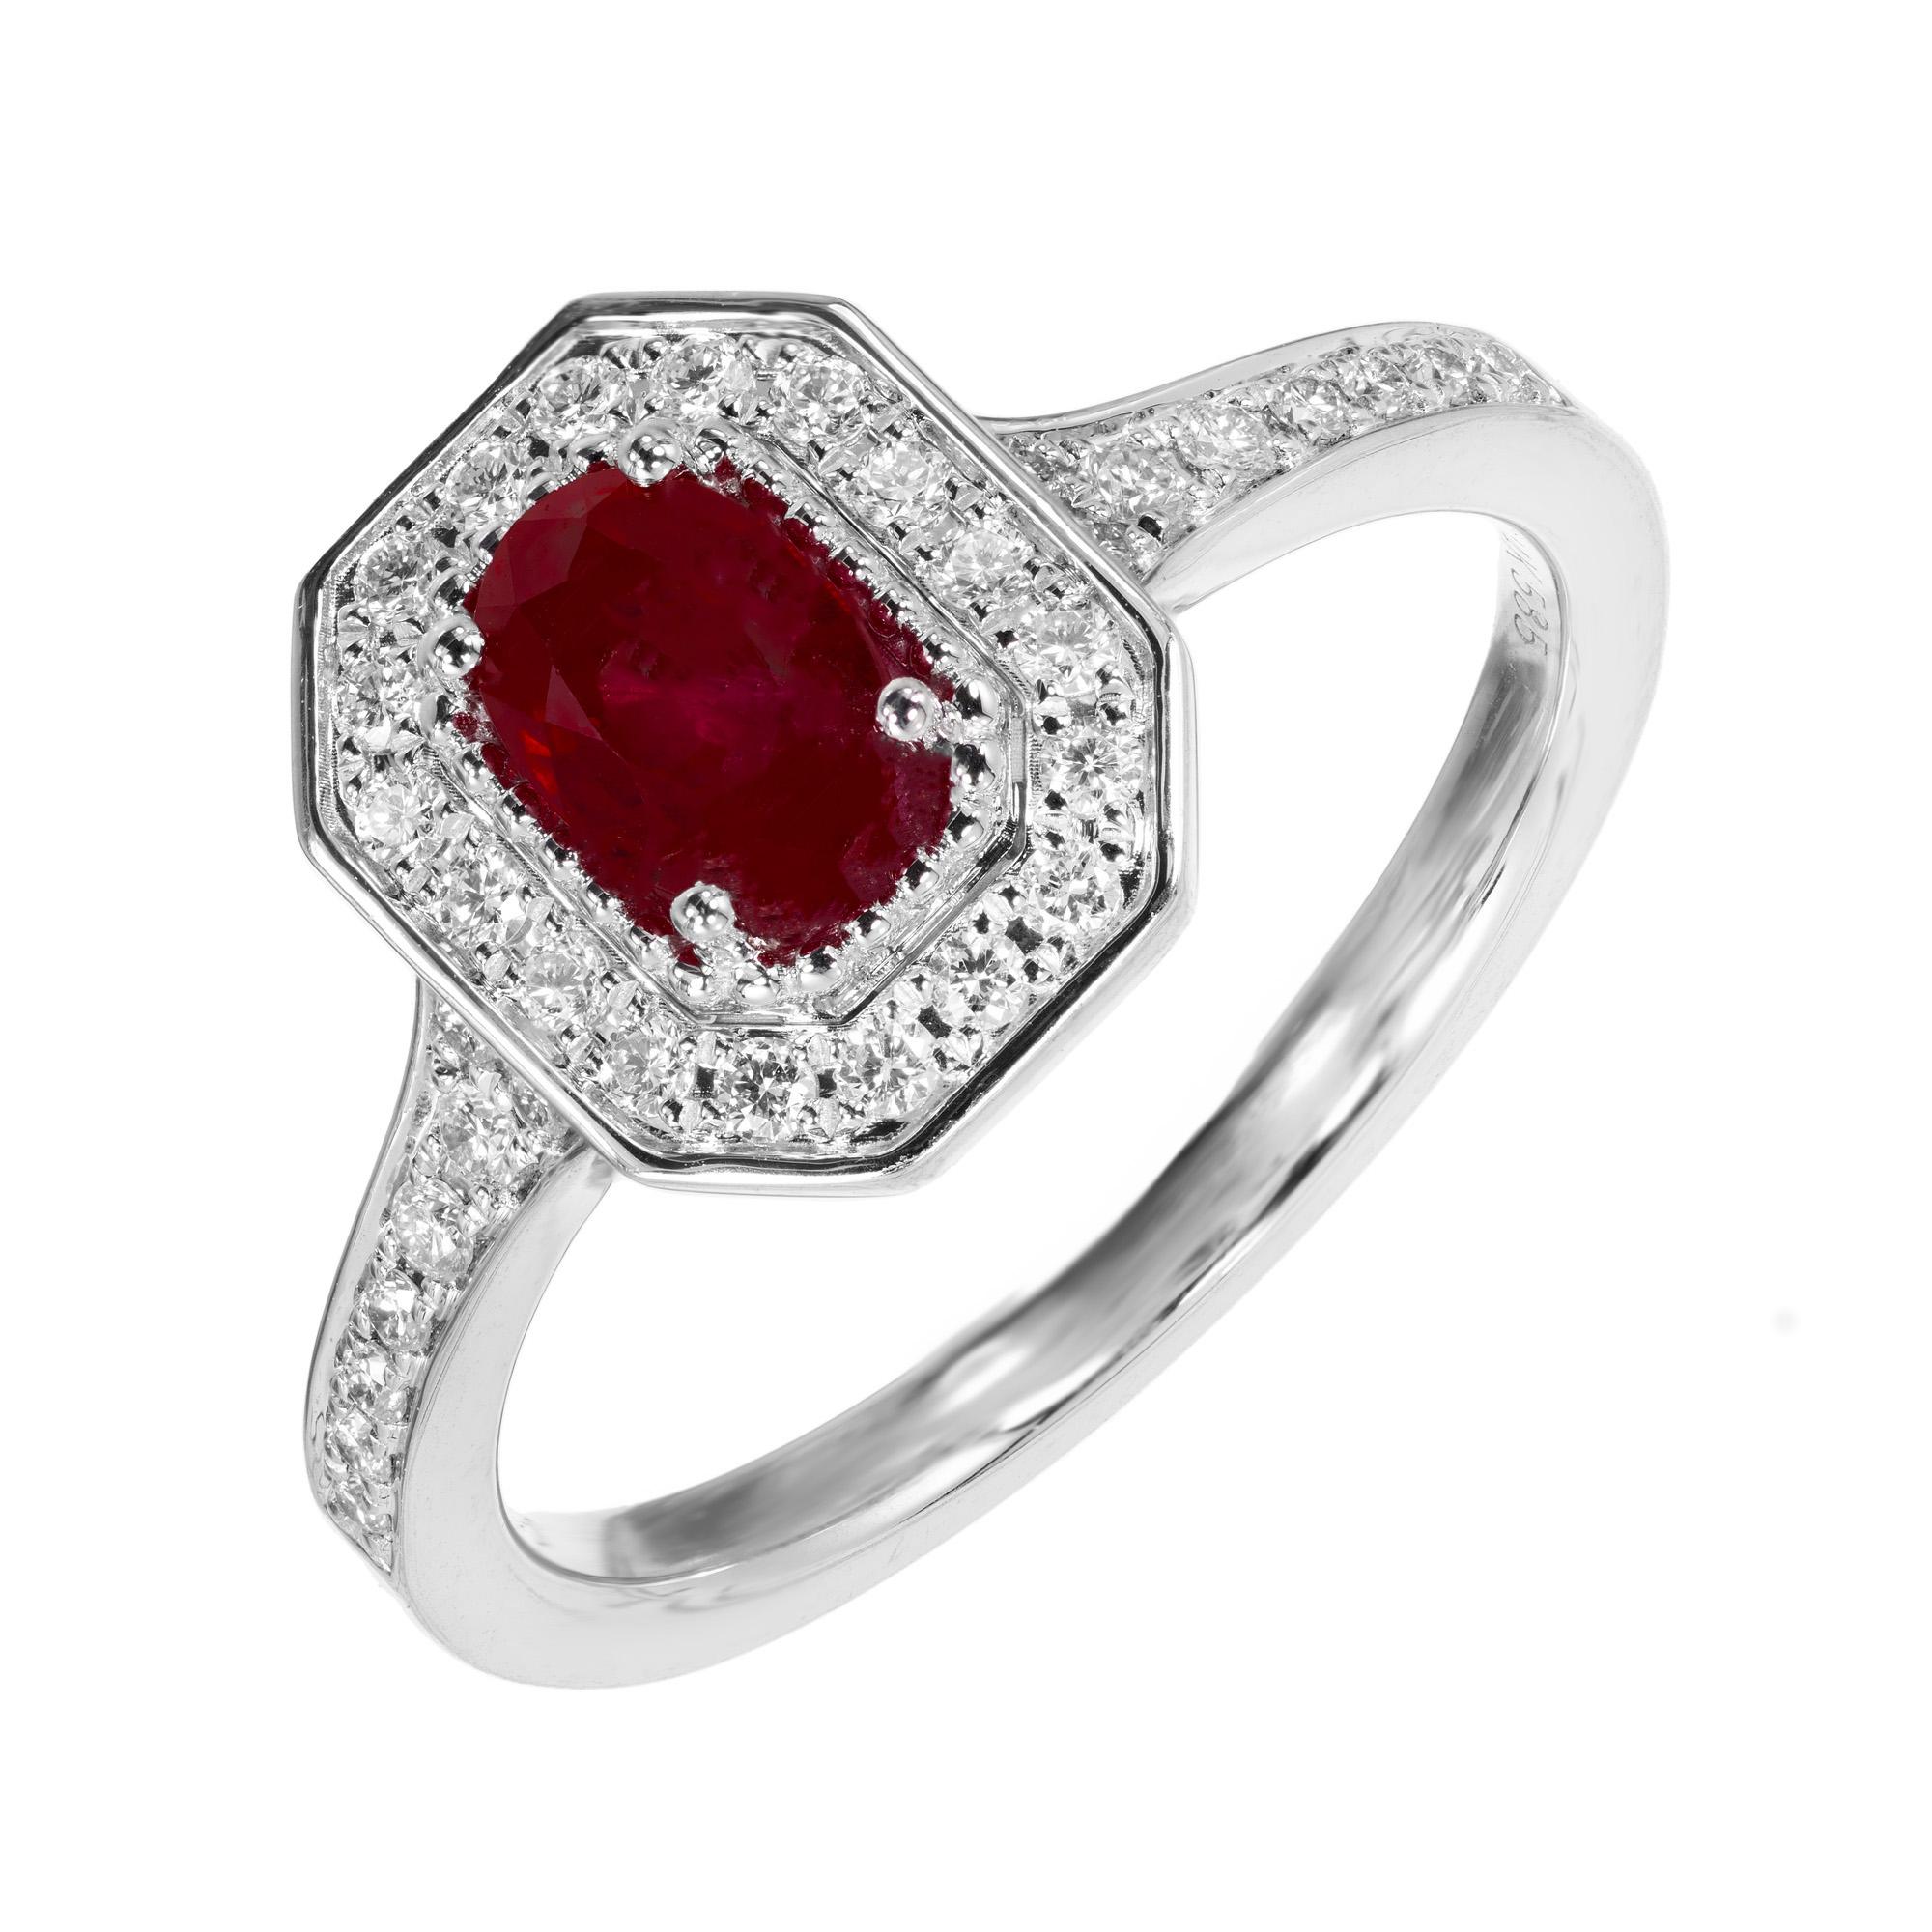 Oval ruby and diamond engagement ring. .77ct oval center ruby, mounted in a 14k white gold octagonal setting with a halo of round brilliant cut diamonds. Accent diamonds also run along both shoulders. Designed and crafted in the Peter Suchy